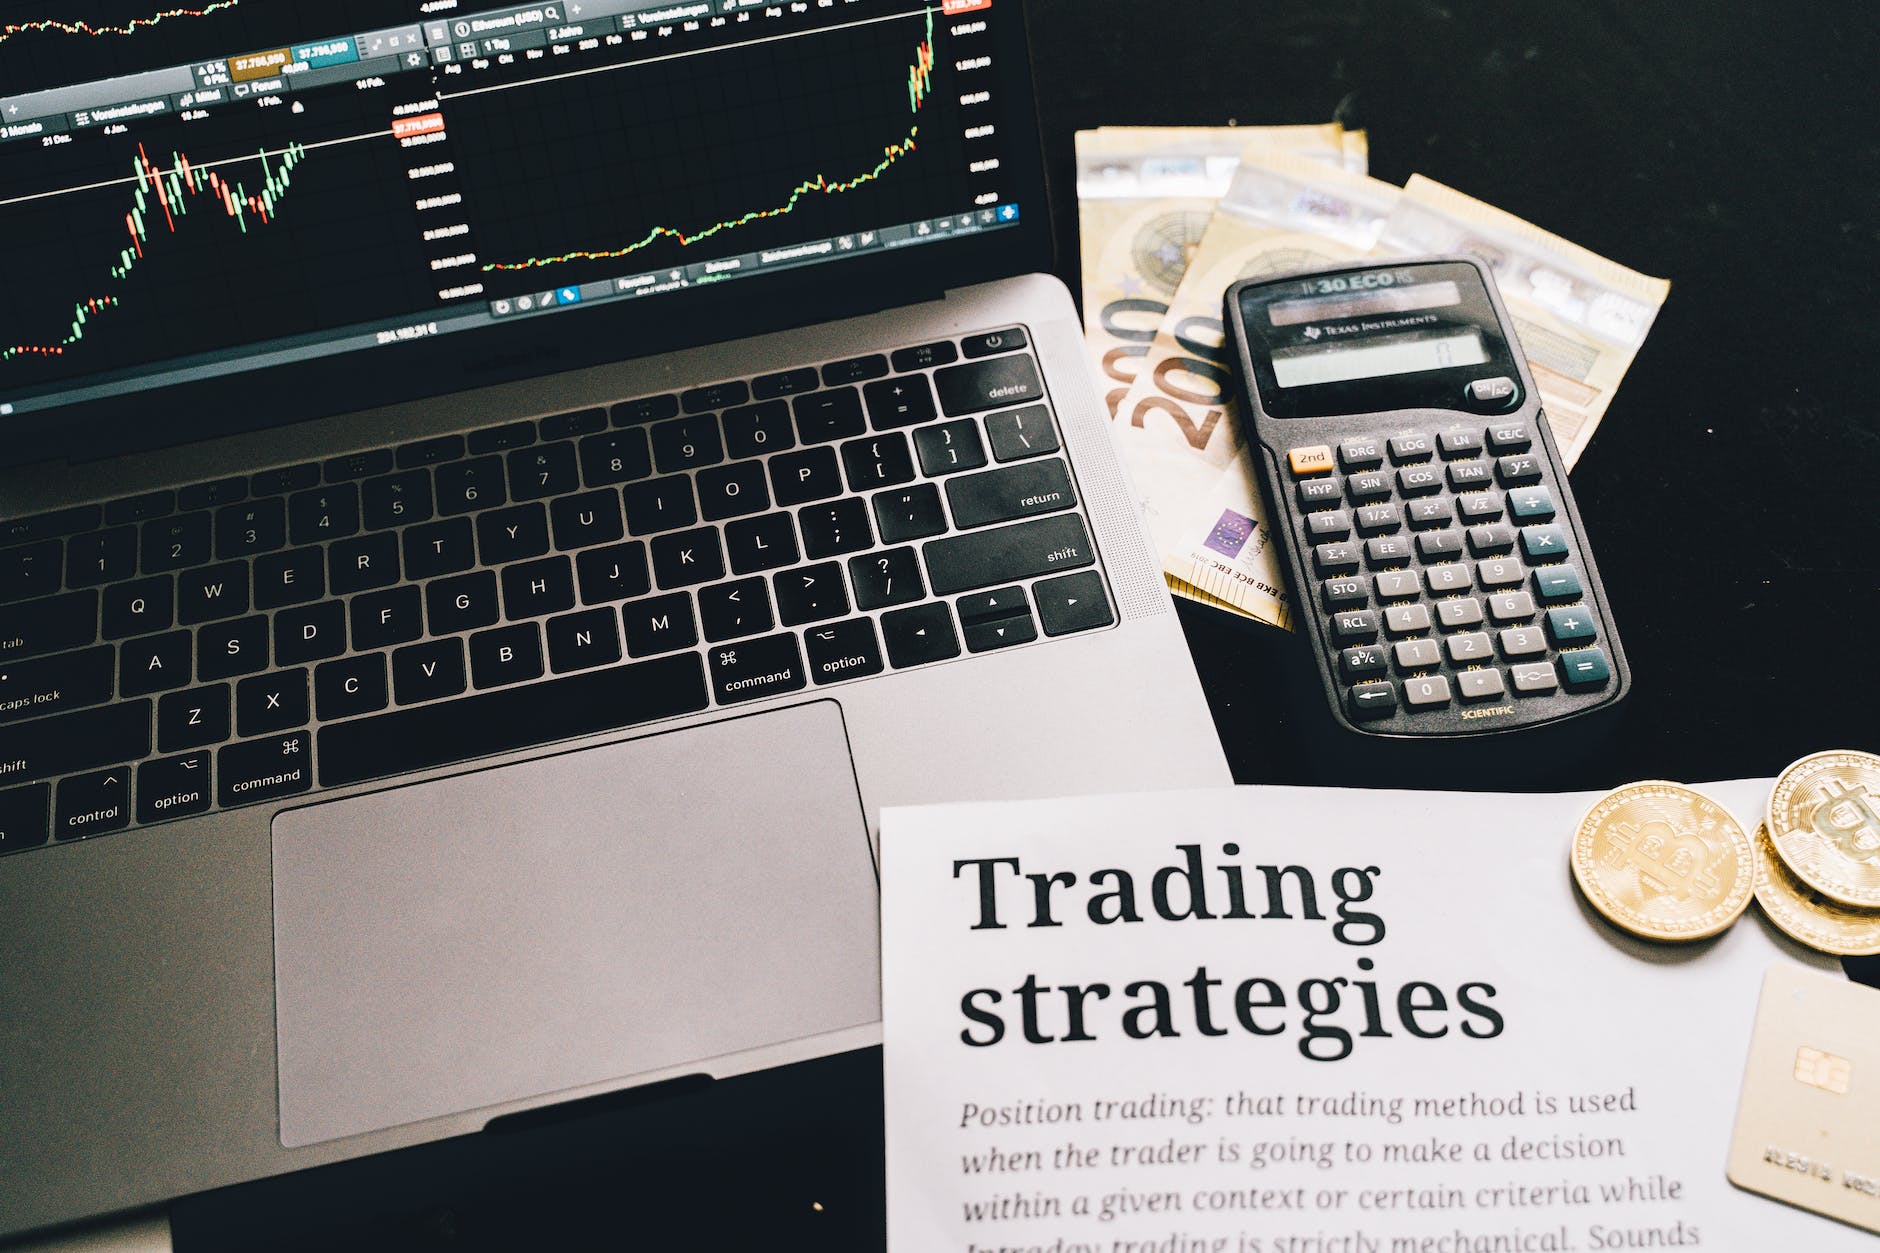 research paper on trading strategies beside calculator and laptop